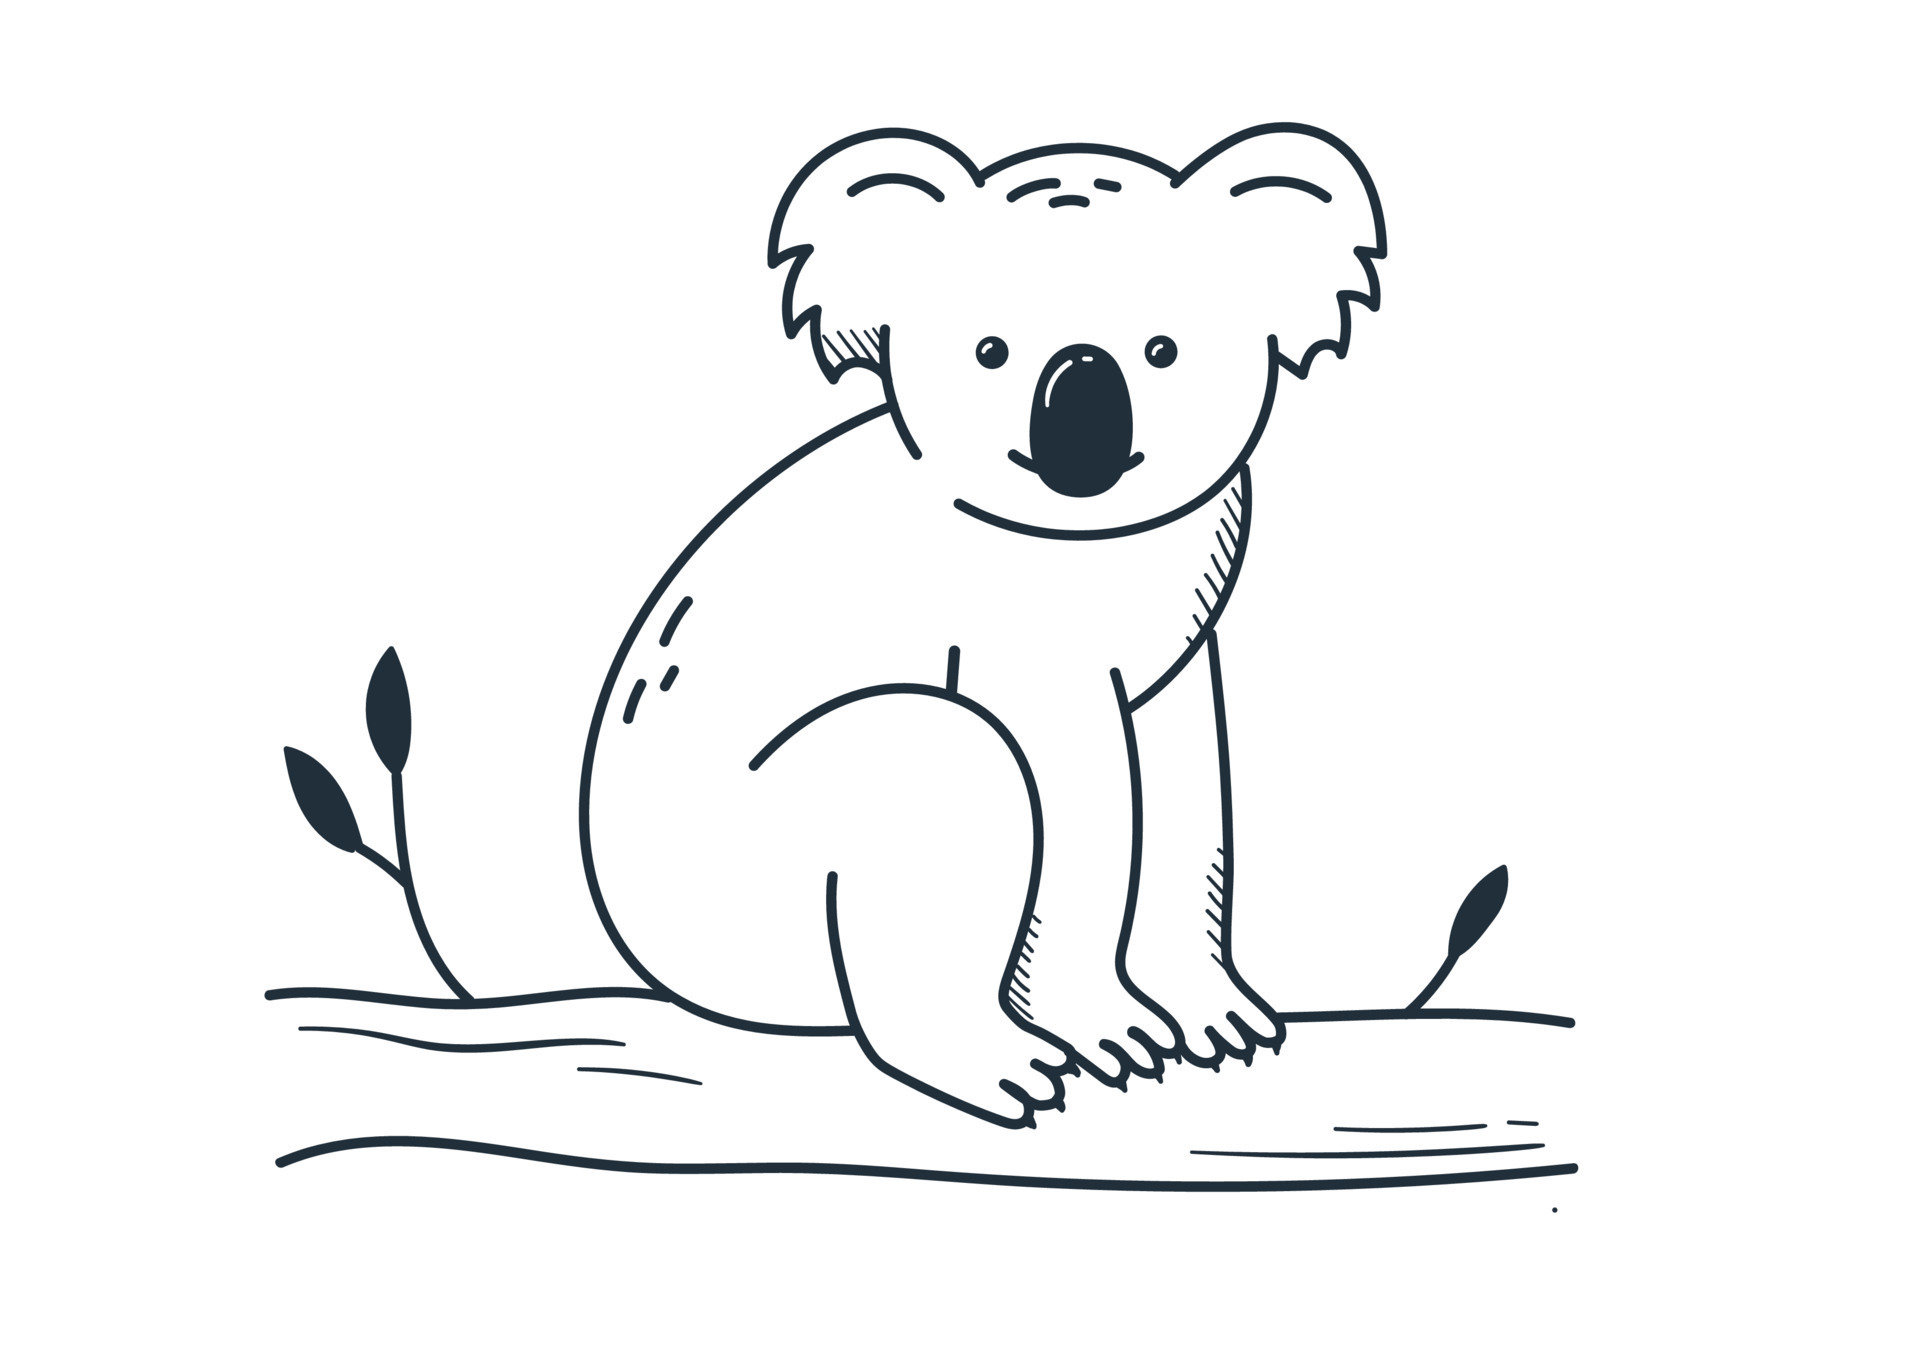 fastversion How to Draw Koala  Step by Step Tutorial For Kids  YouTube